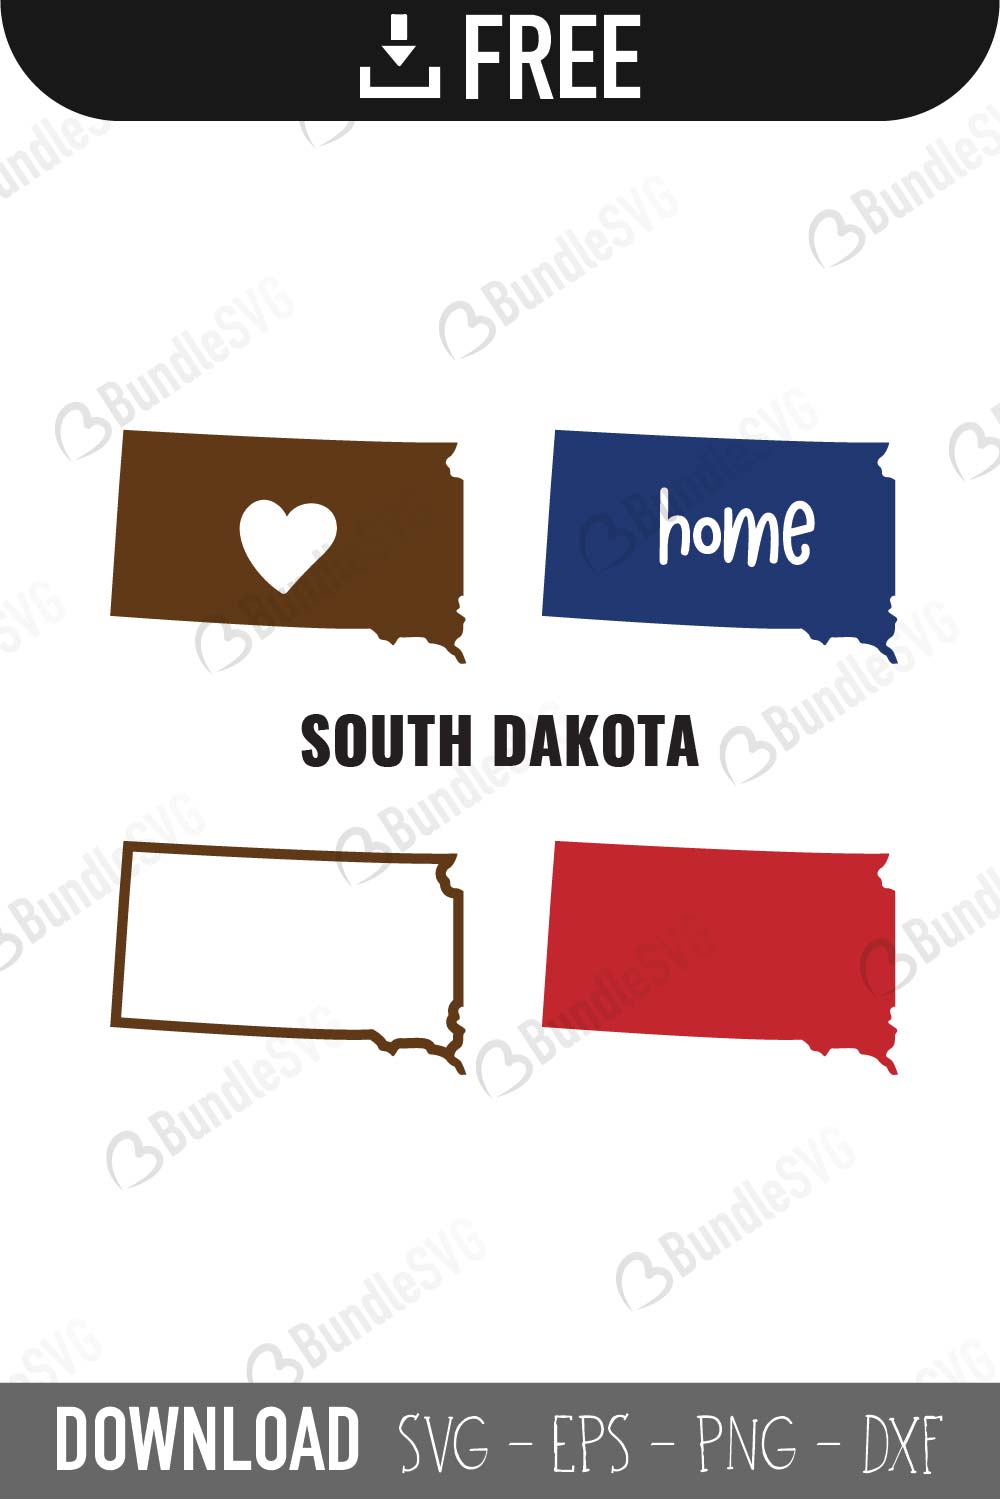 Download Craft Supplies Tools South Dakota Heart Svg Dxf Cut File Instant Download Stencil Silhouette Cameo Cricut Download Clip Art Commercial Use Sculpting Forming